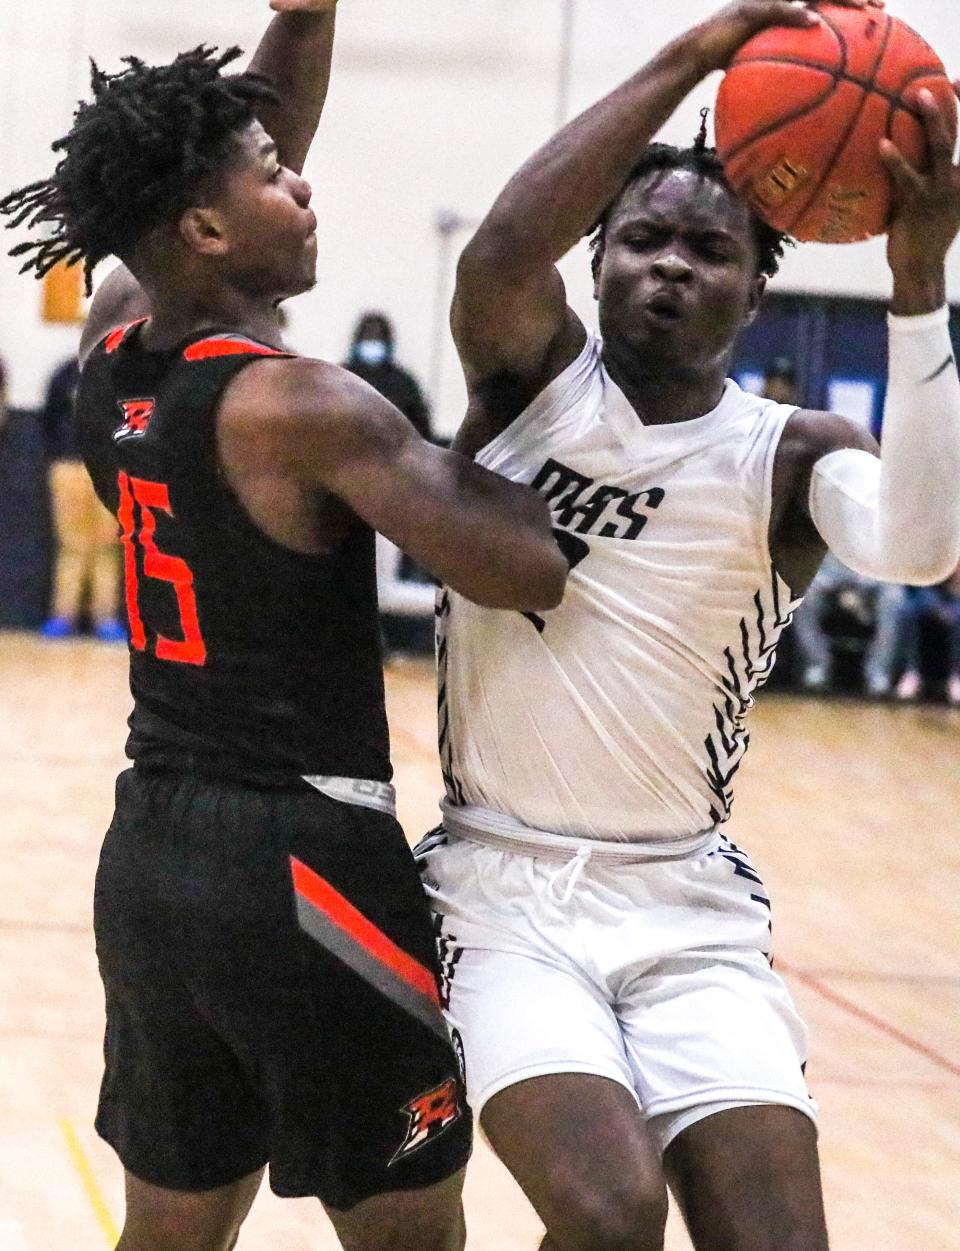 Milwaukee Academy of Science's Tayshawn Bridges drives to the basket as Riverside University's Carleone Turner guards him during their game Dec. 1. The Novas are the top-ranked team in Division 4.